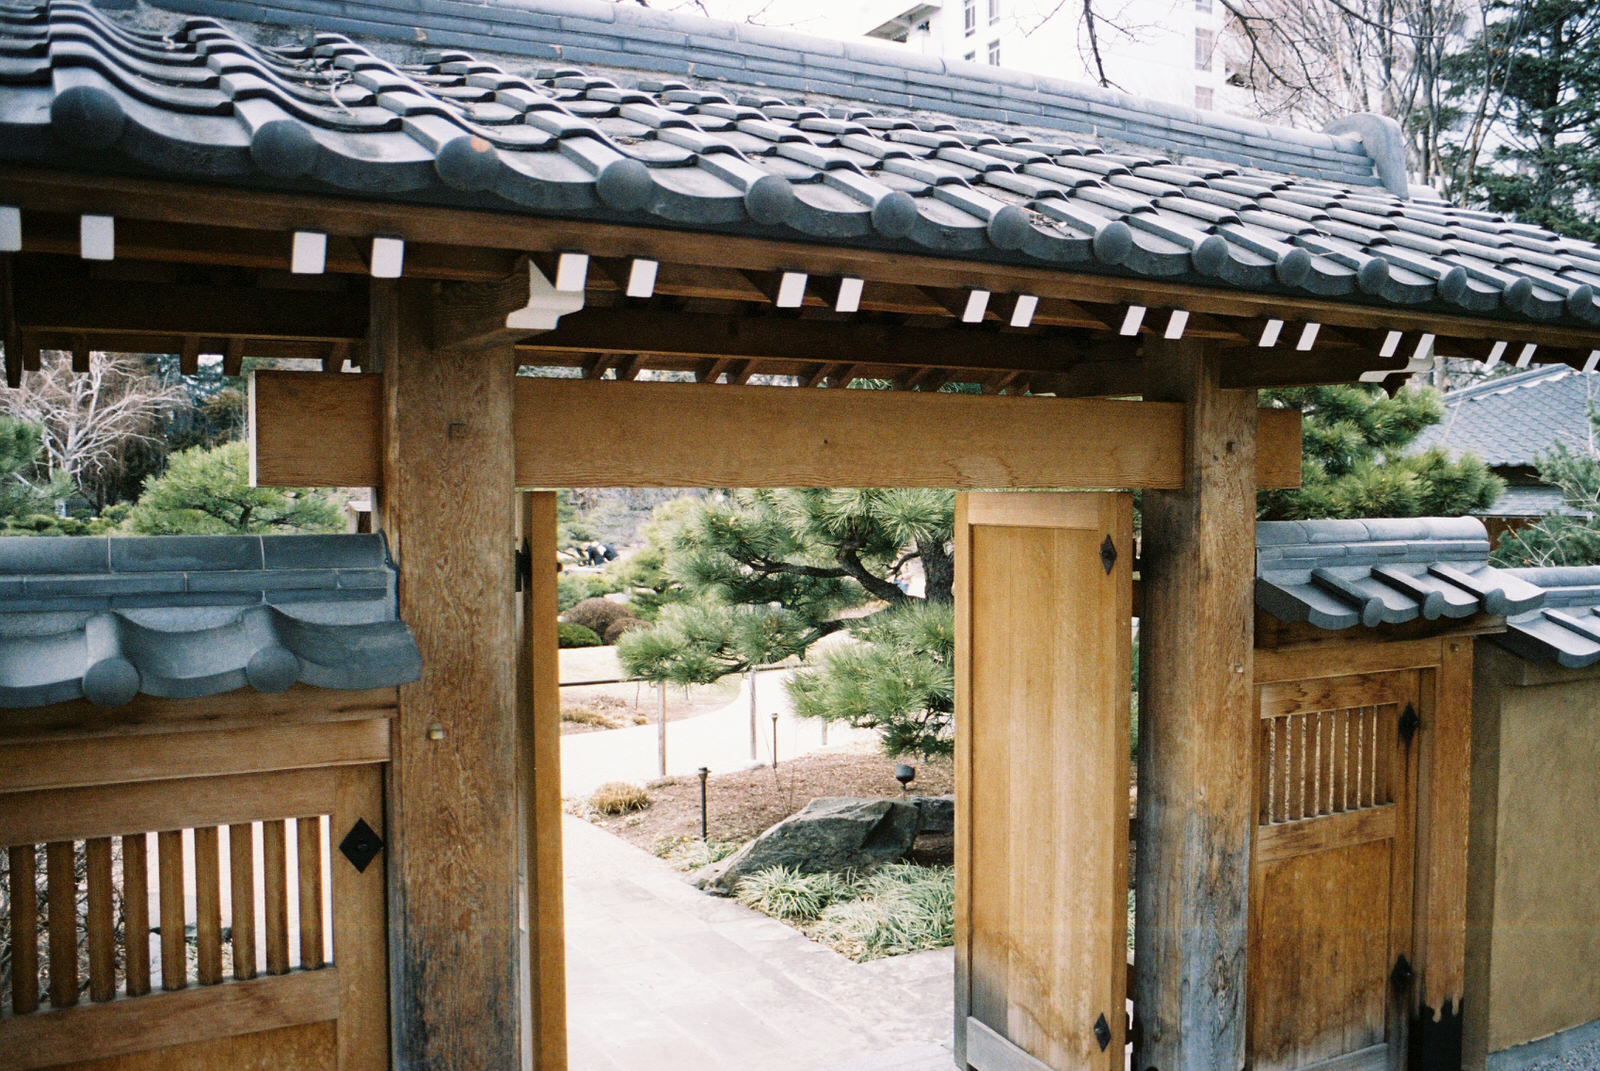  Entrance to the Japanese gardens. 